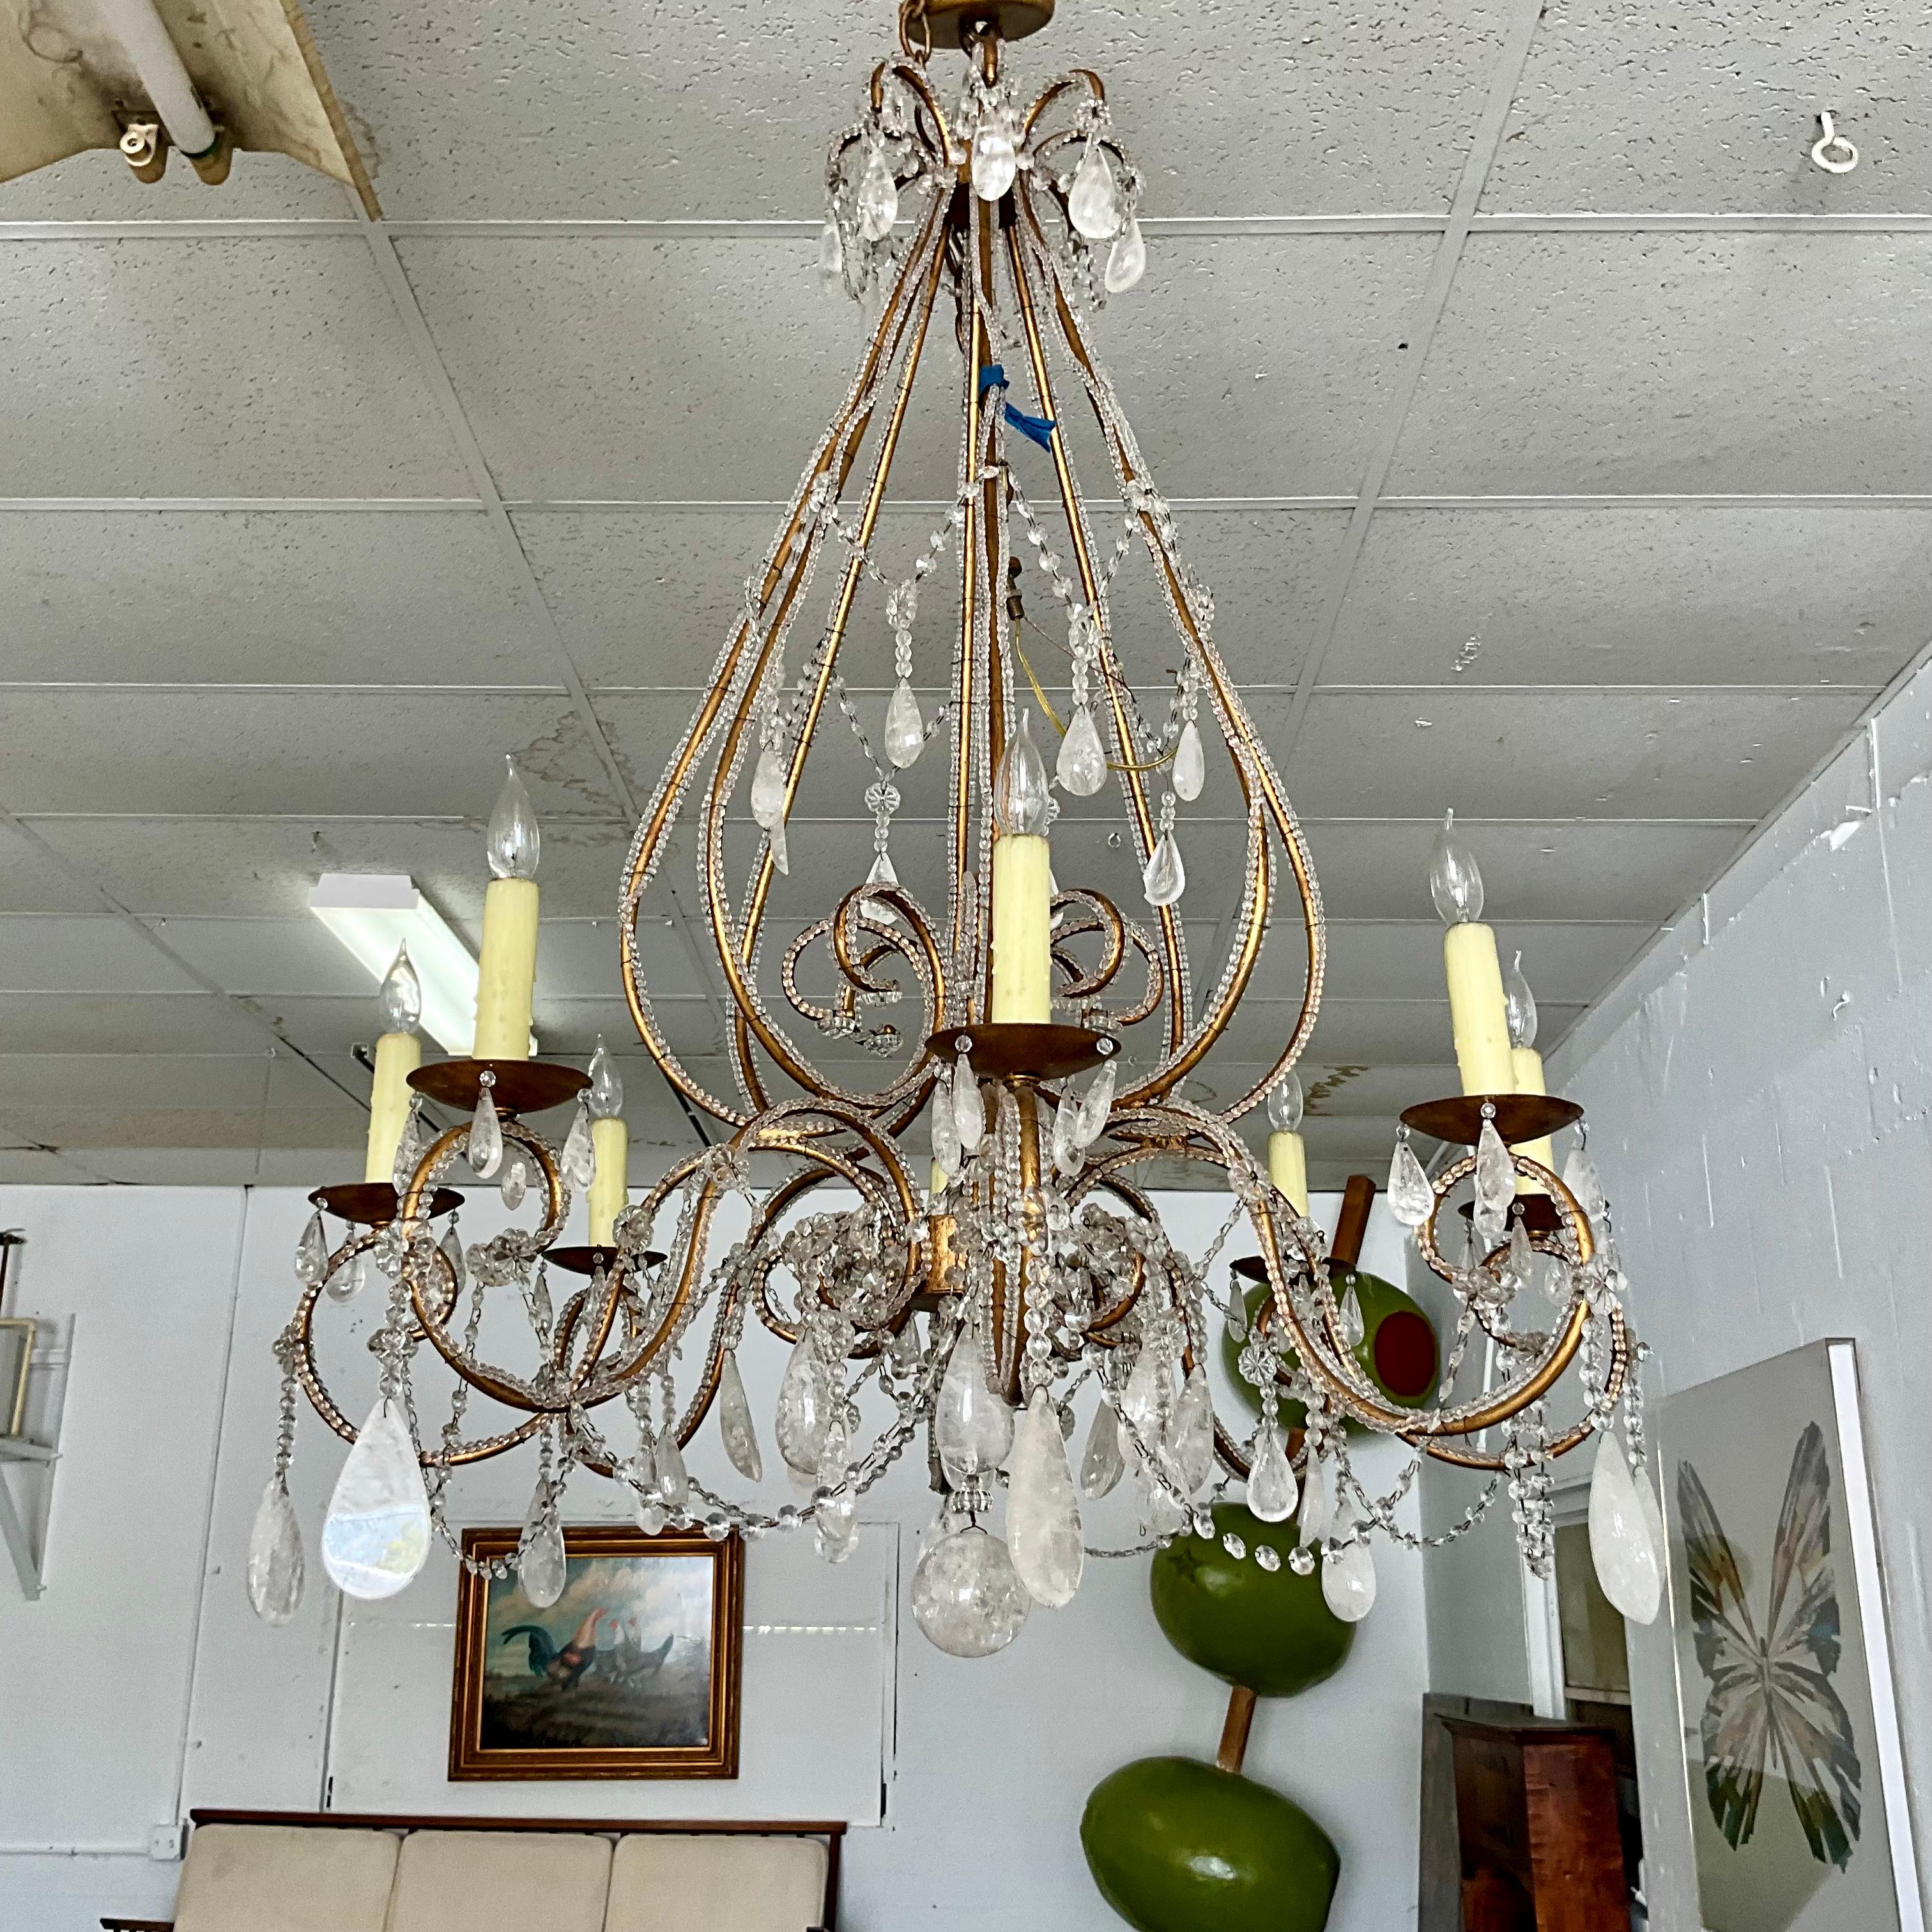 Stunning 1960’s rock crystal gilt metal chandelier with eight scrolled arms encompassed in glass faceted beading with rock crystal prisms, and a large 3” sold rock crystal sphere hanging from the bottom center of the chandelier.  The chandelier